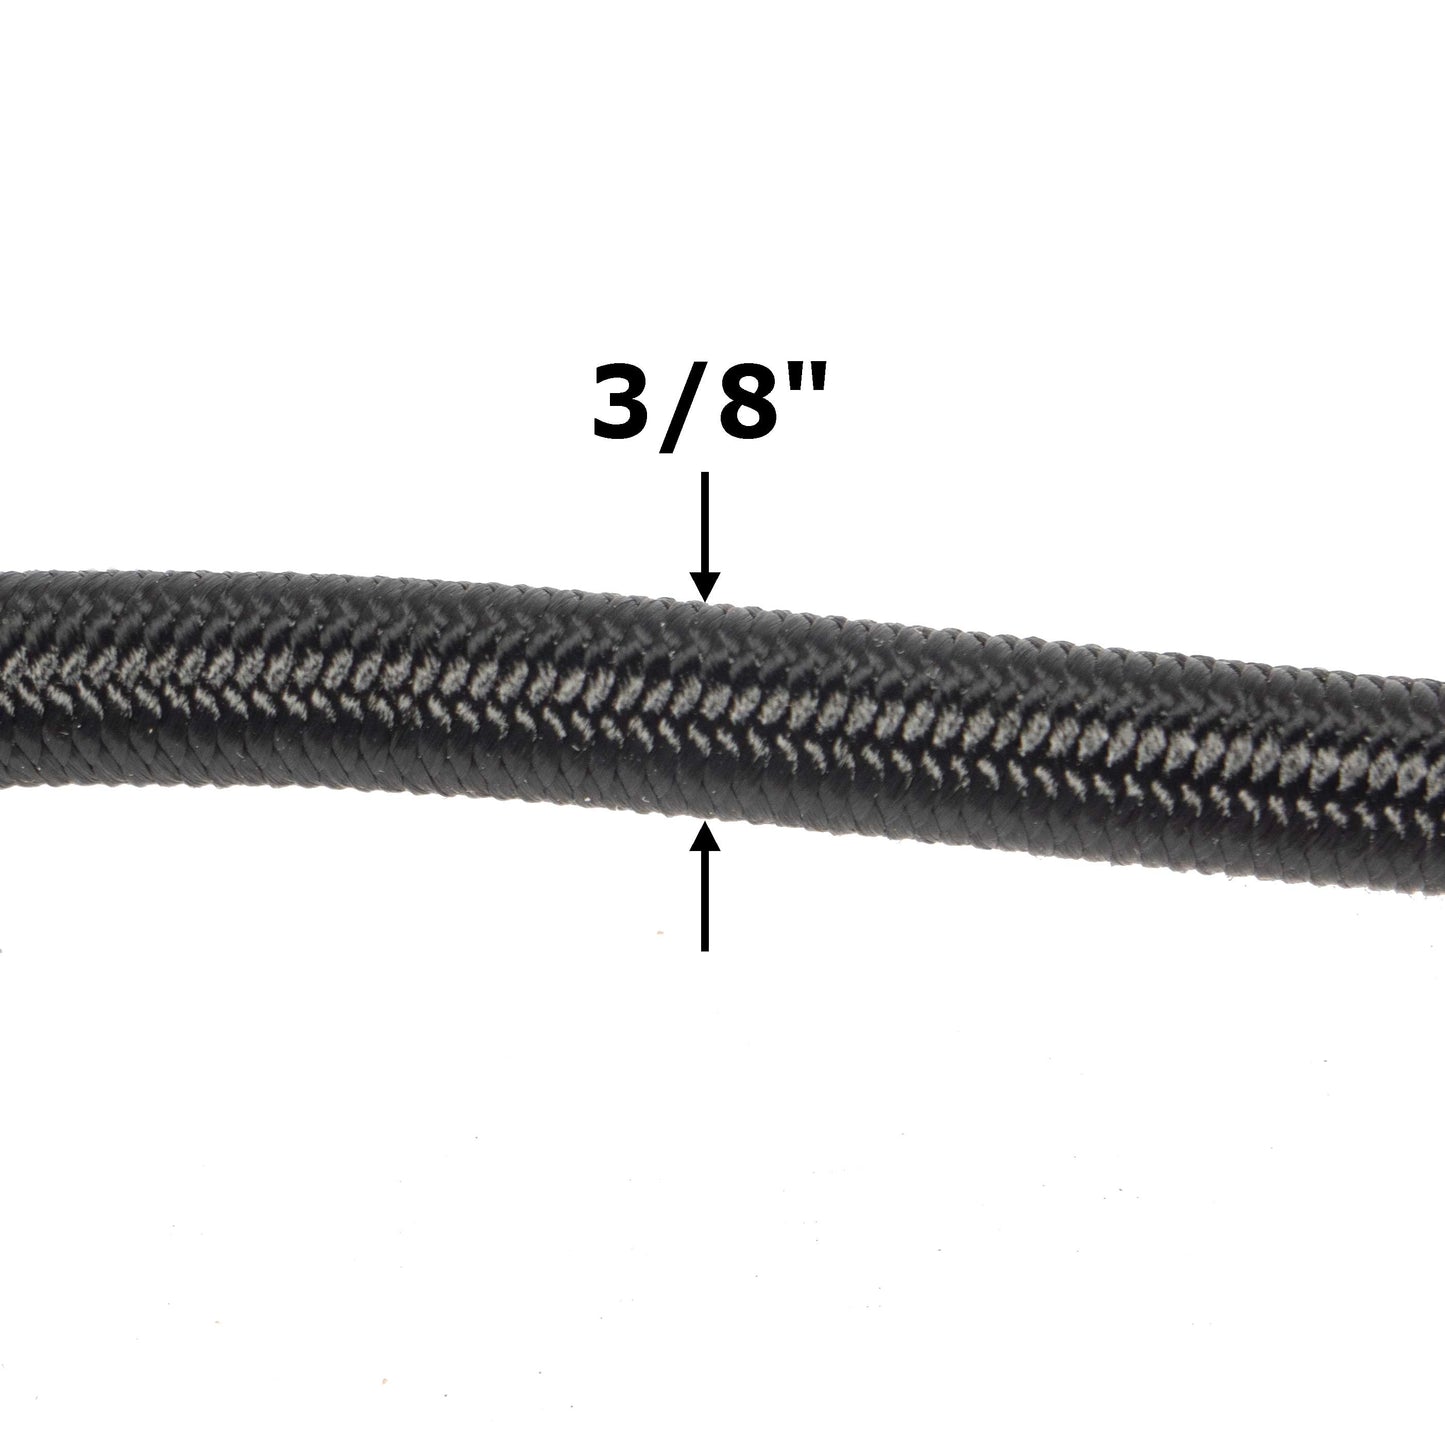 38 foot foot9mm Black Polyester Shock Cord 100 ft image 1 of 6 image 2 of 6 image 3 of 6